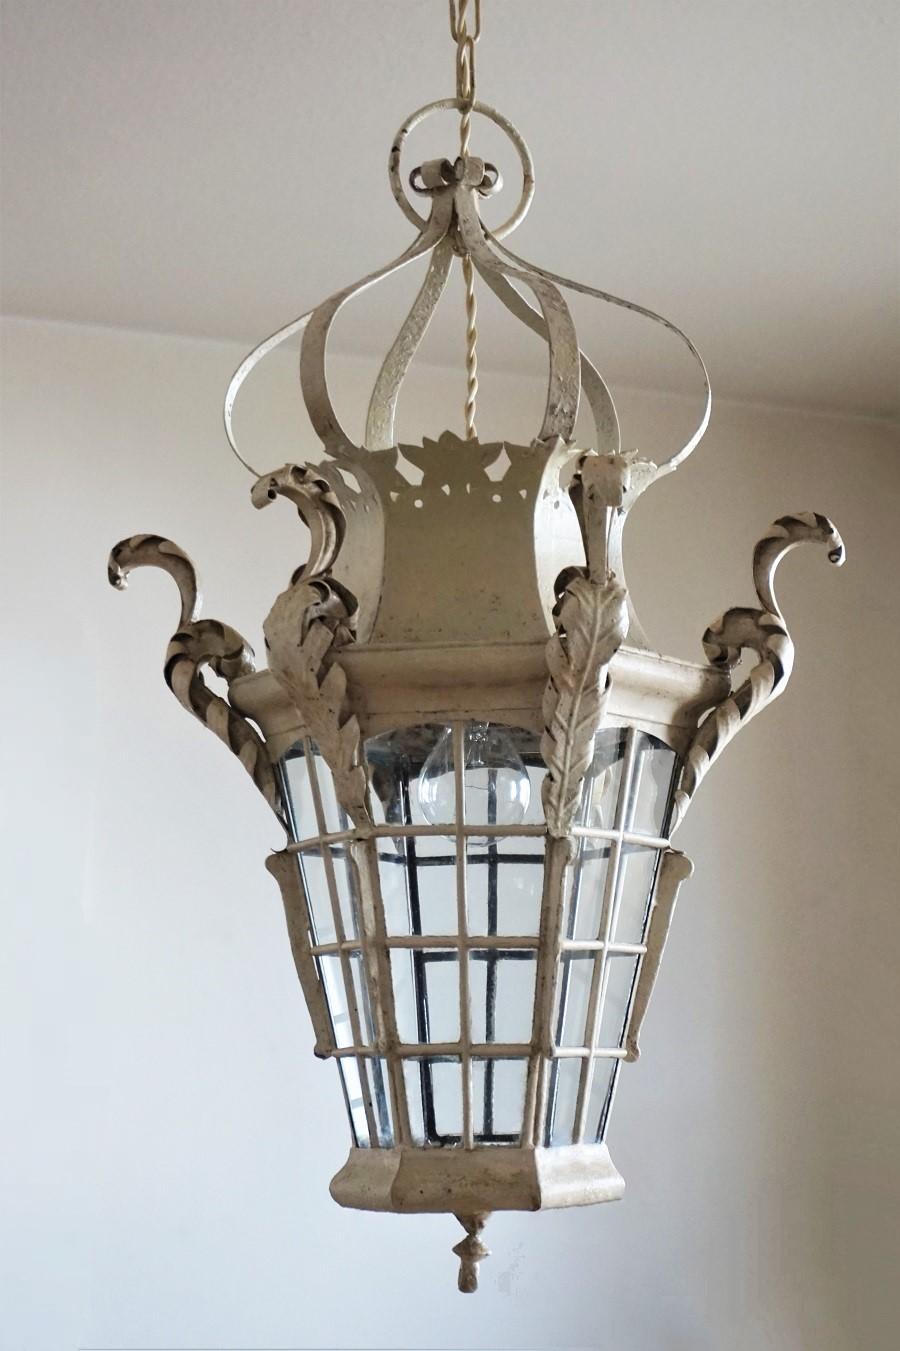 Antique handcrafted wrought iron street lantern with original off-white paint, France, late 19th century. The shaped crown top is leading down to a hexagonal body with glass panels decorated with leaf ornaments, hexagonal glass panel at the bottom.